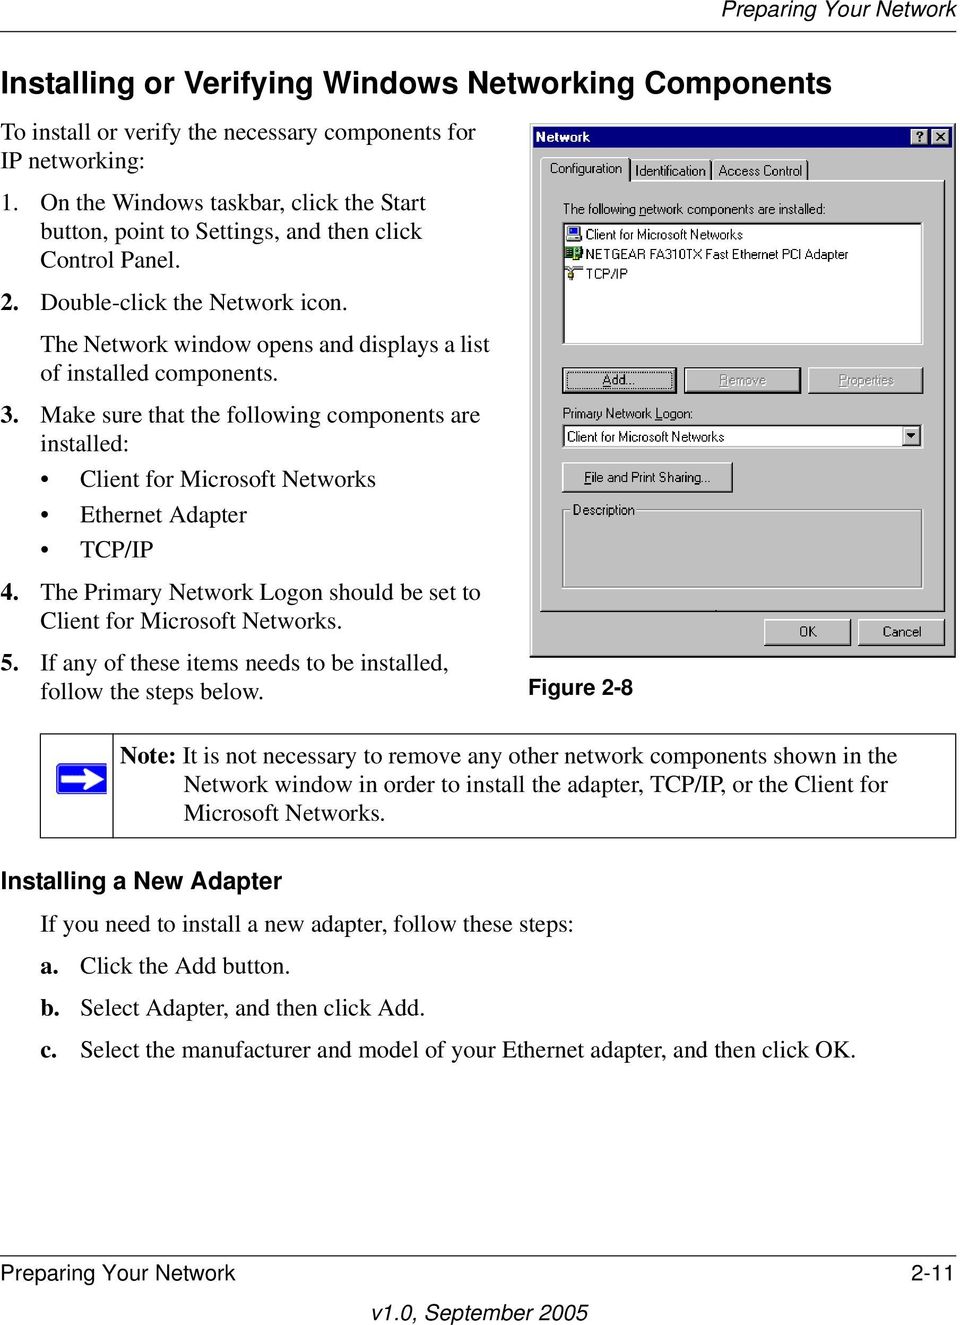 3. Make sure that the following components are installed: Client for Microsoft Networks Ethernet Adapter TCP/IP 4. The Primary Network Logon should be set to Client for Microsoft Networks. 5.